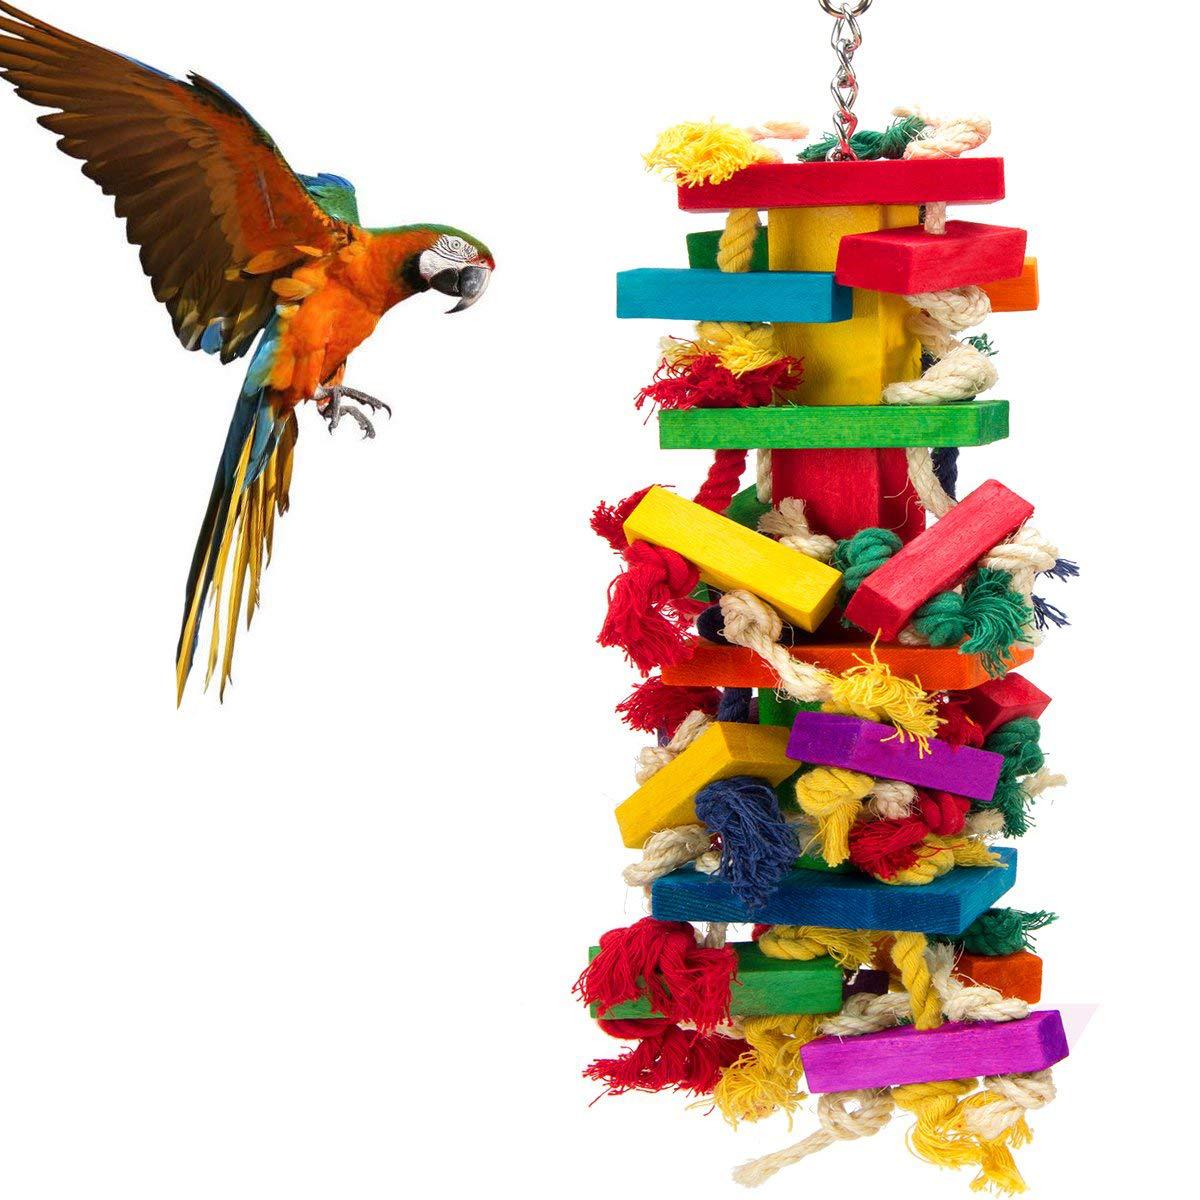 Discover Endless Entertainment for Your Bird with Our Supplies Large Color Toy!